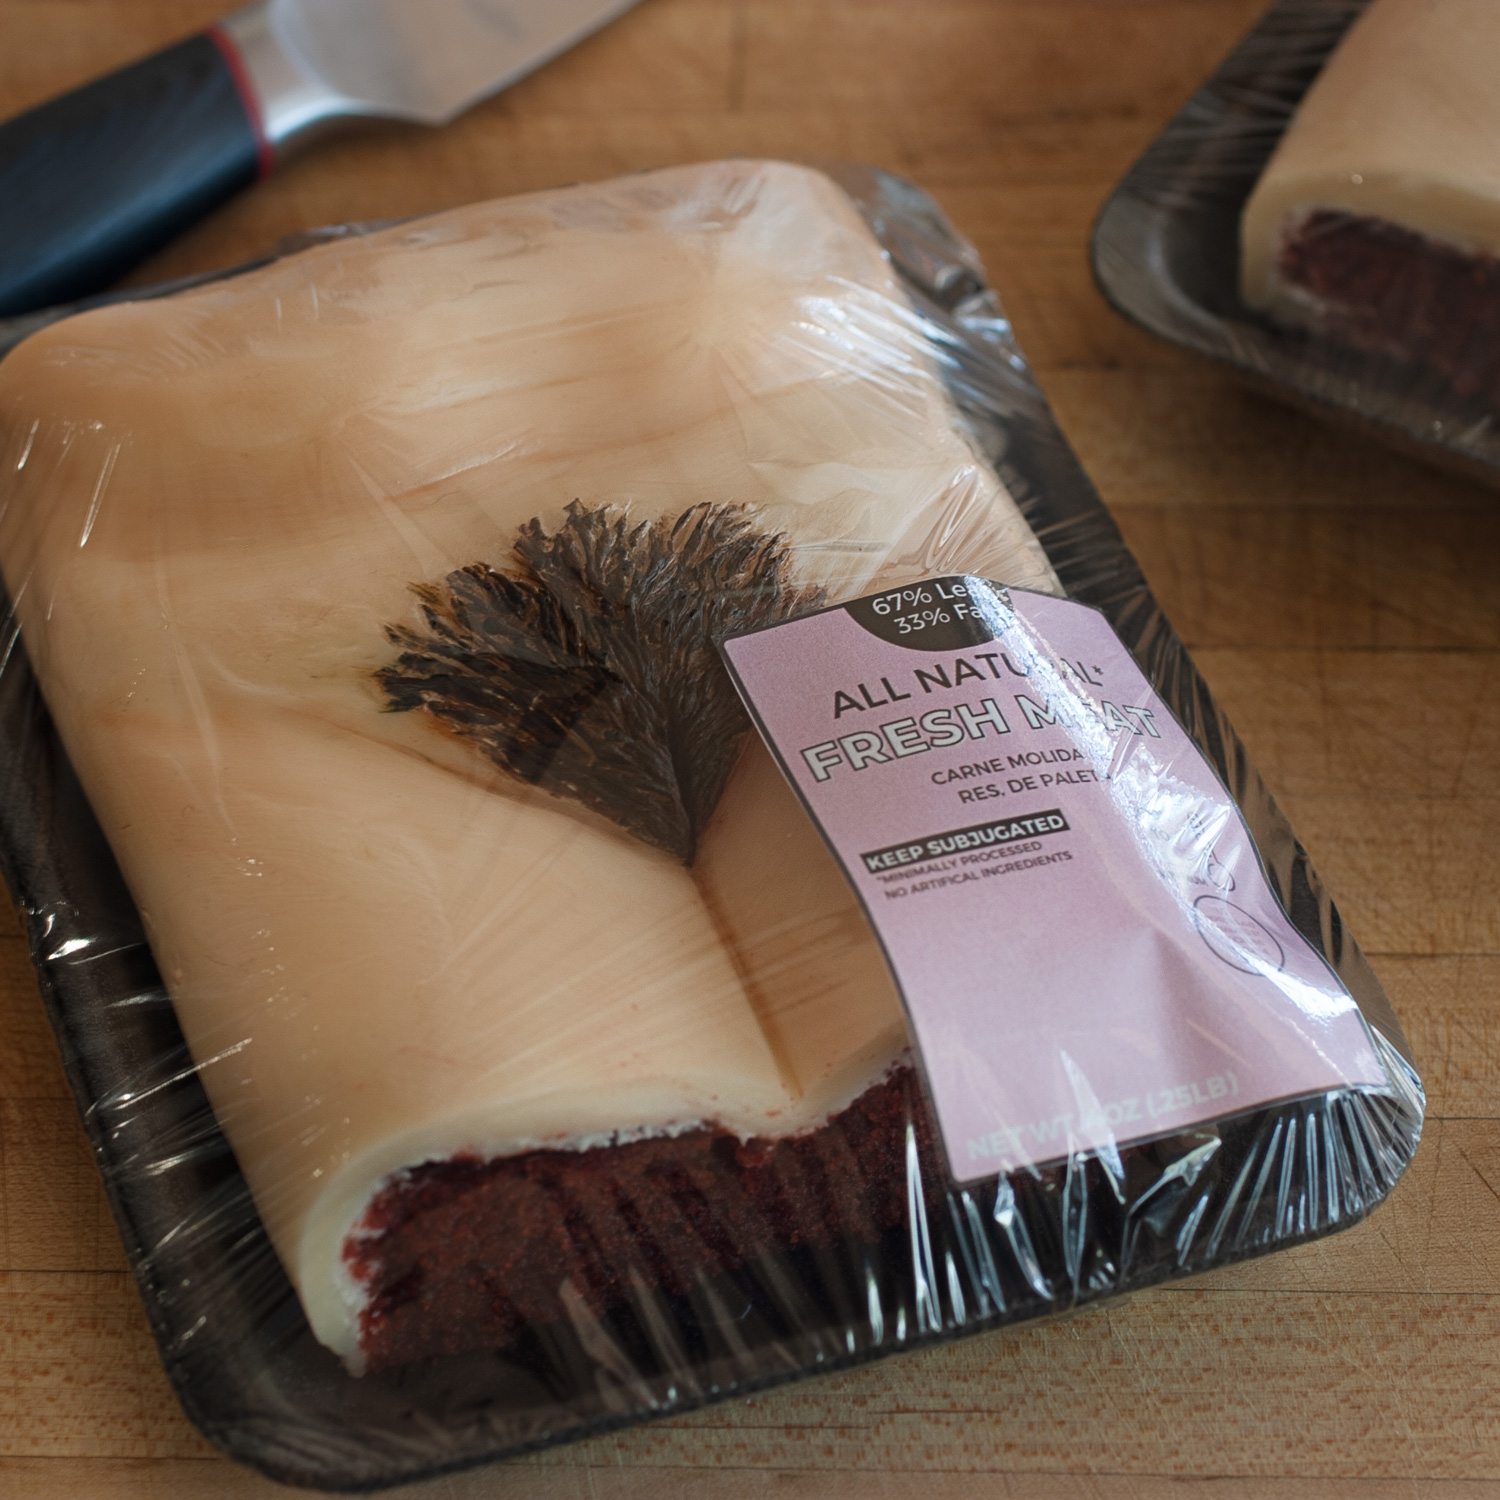 Red velvet cake with modeling chocolate art made to look like a human vulva with a brown triangle of pubic hair. The cake is packaged in a styrofoam meat tray, wrapped in plastic wrap with a pink label.